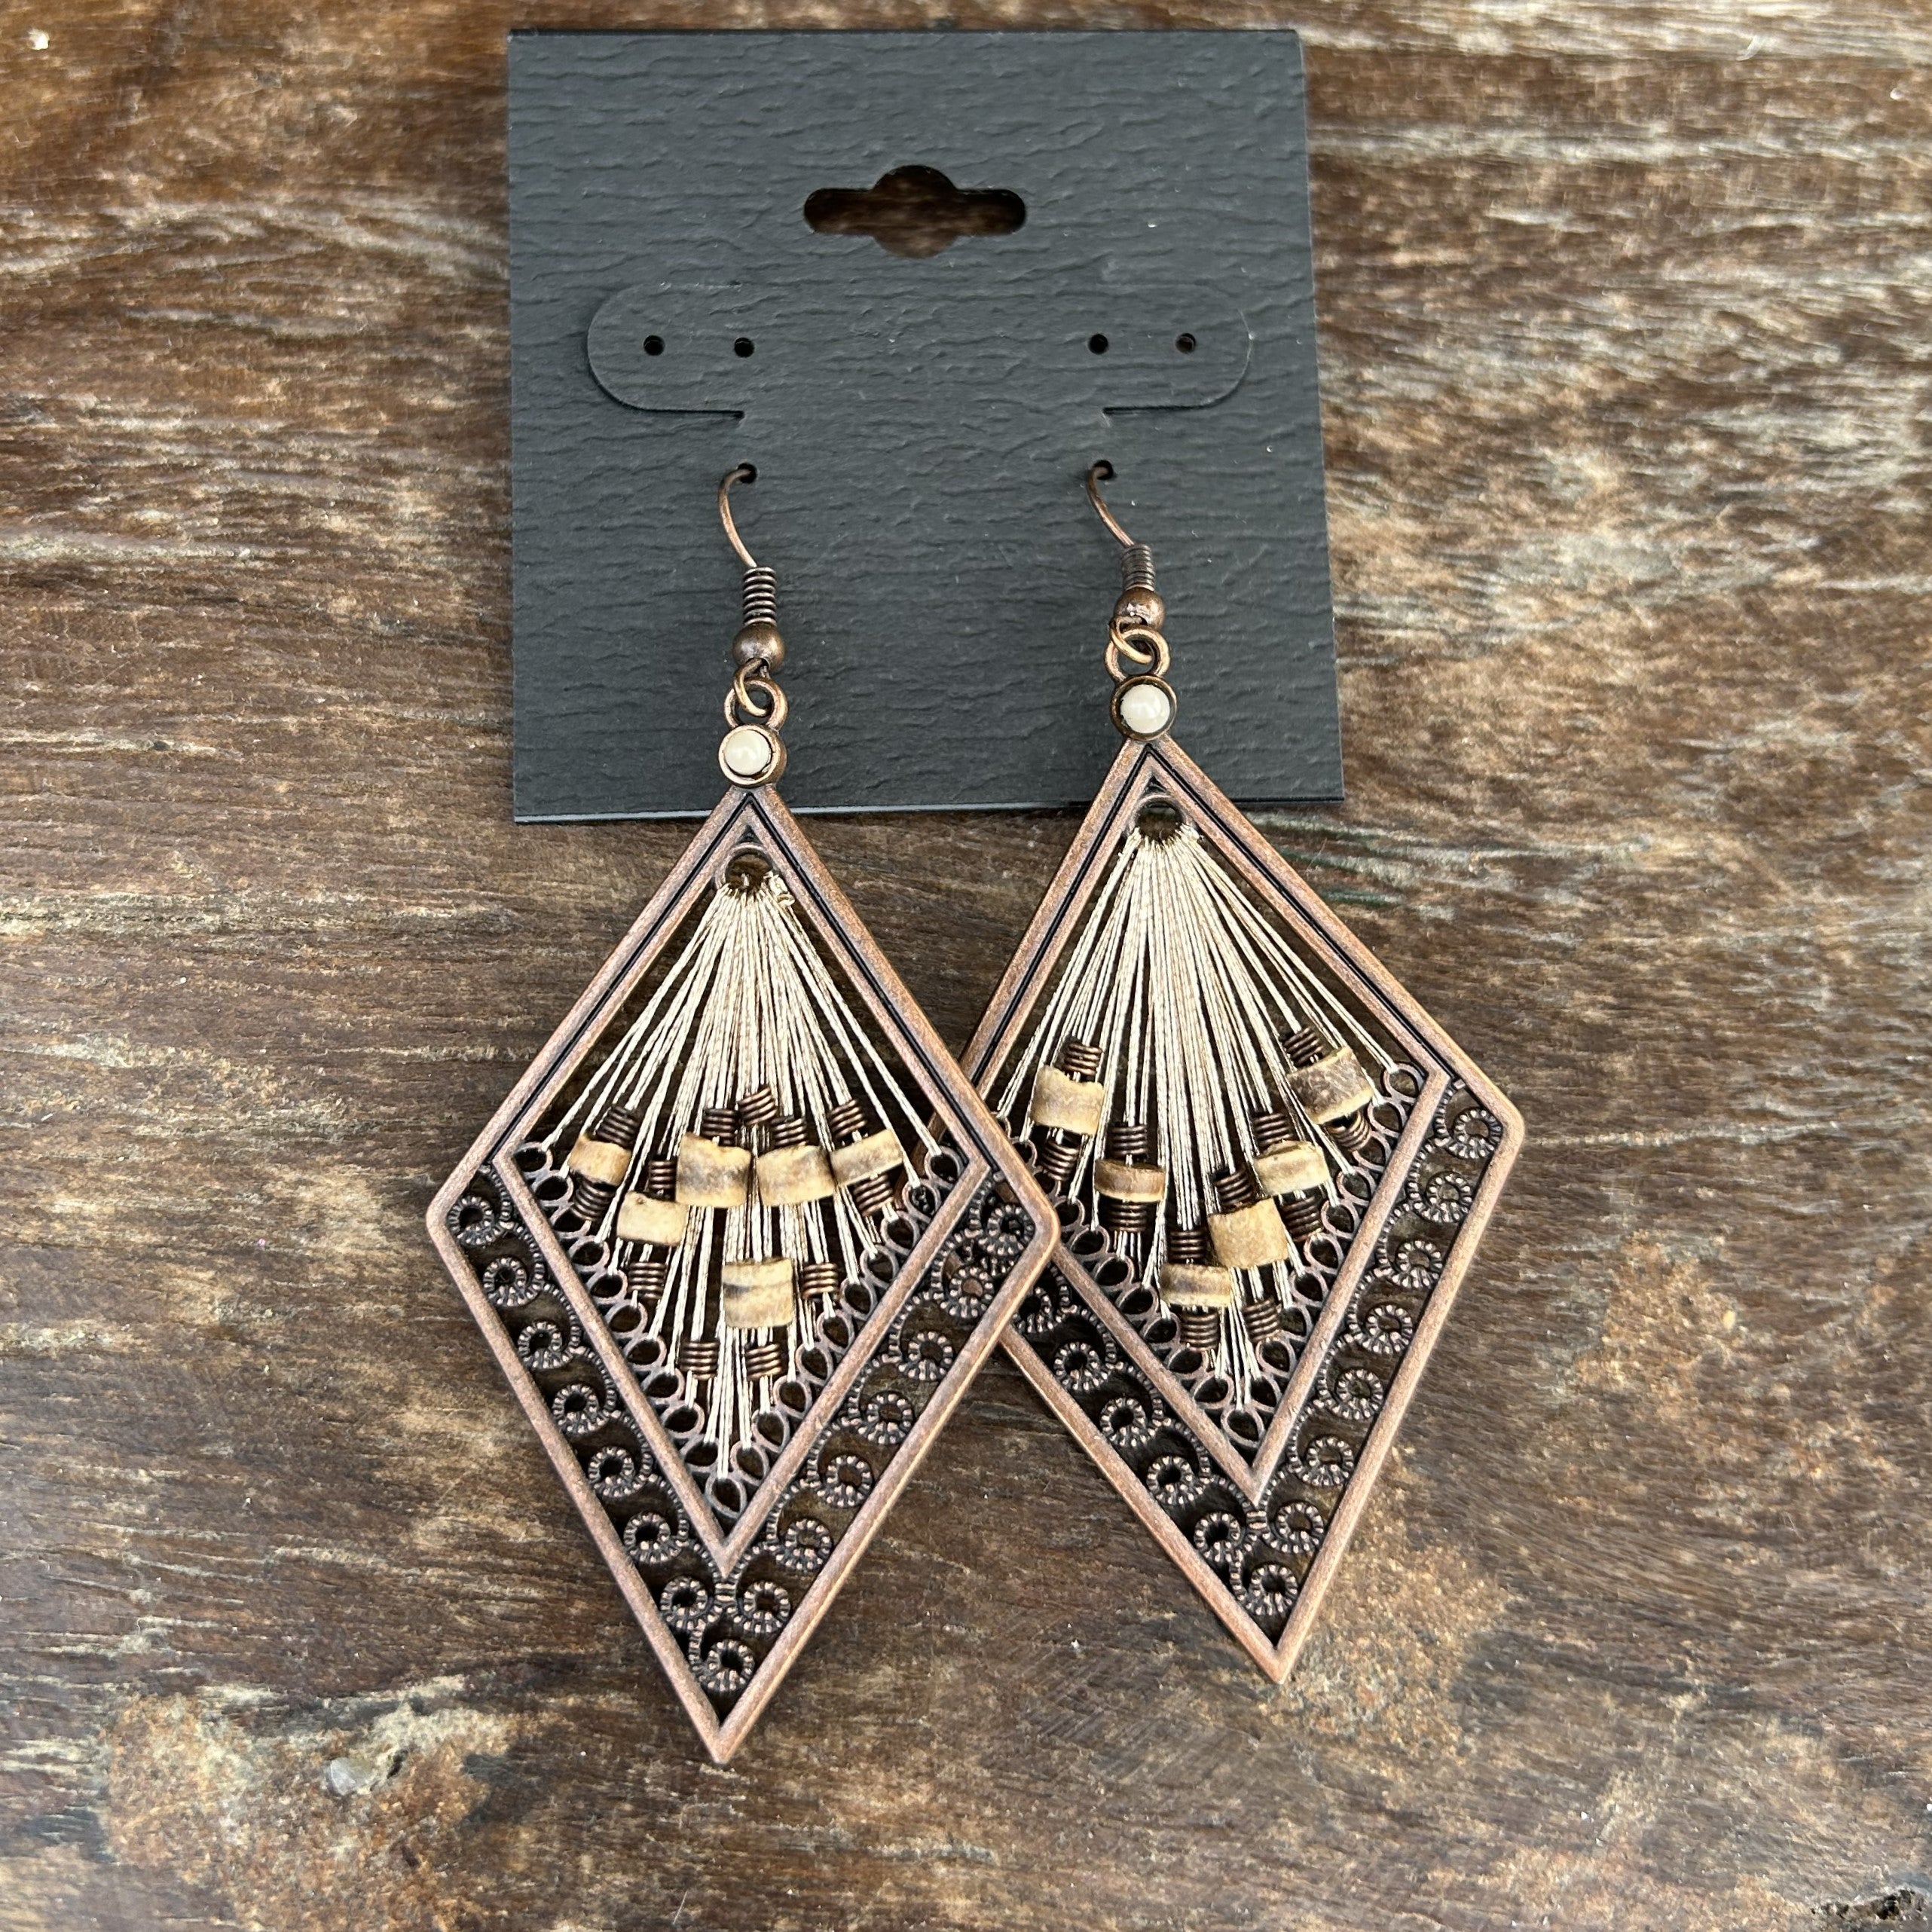 Add a touch of chic elegance to your outfit with these beautiful Geometric Bronze Metal Earrings! Featuring stylish center tubular stones, these earrings are sure to be a stunning addition to your jewelry collection. You will love the way they look and feel when wearing them, making them a must-have accessory for any occasion.